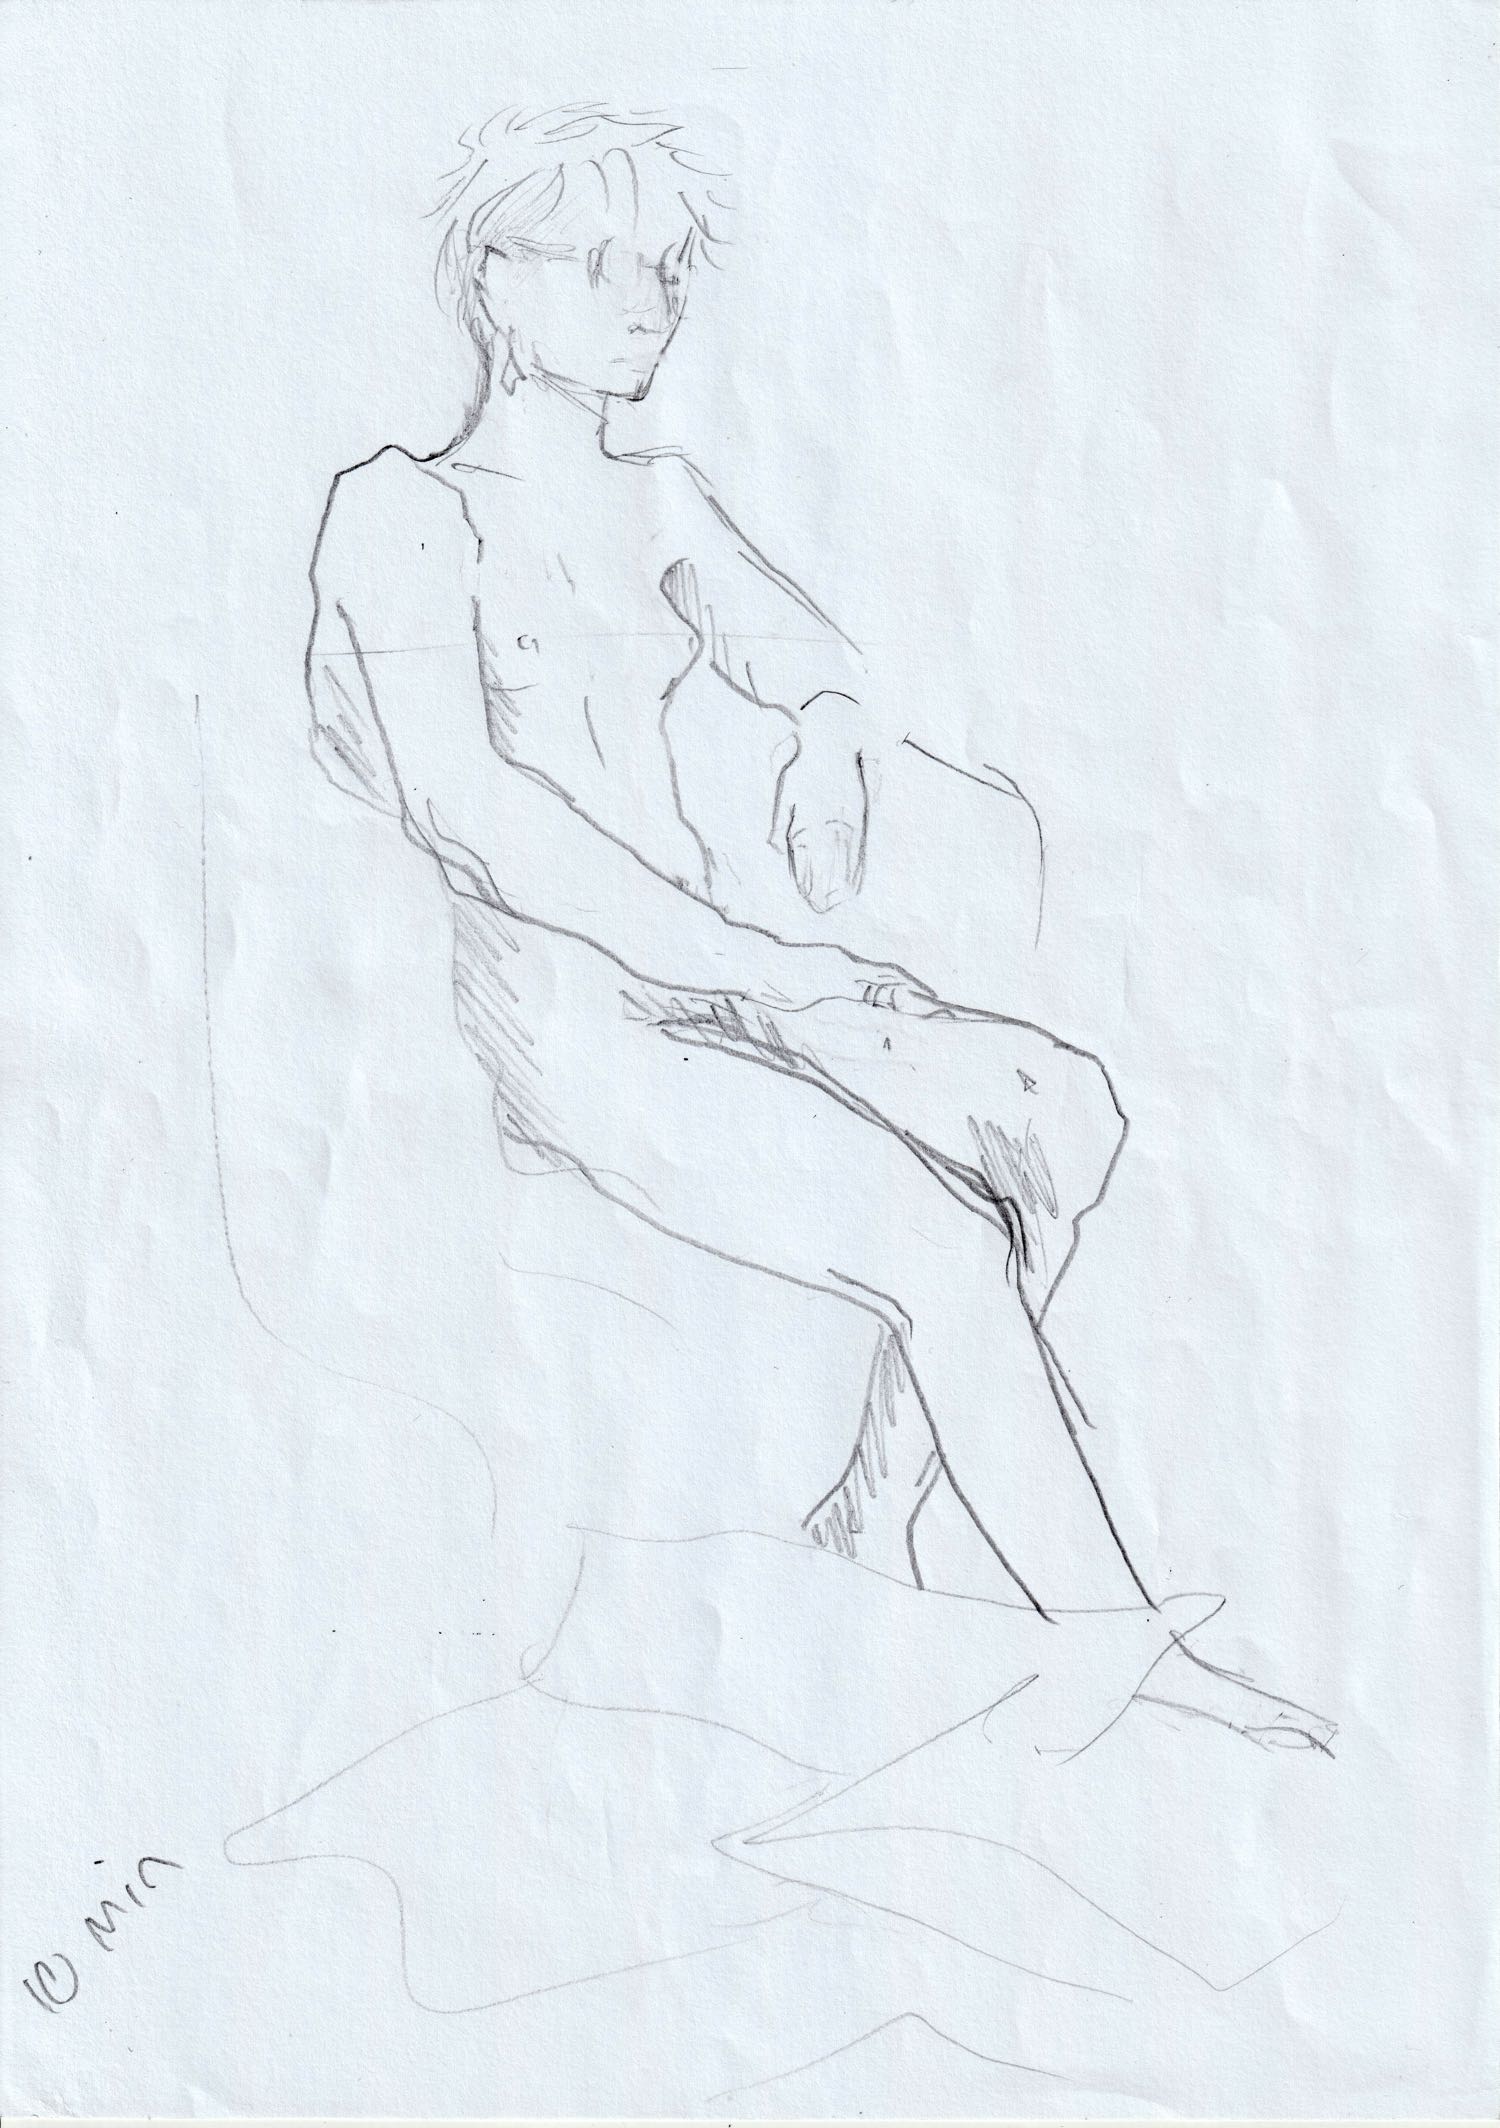 encil drawing of woman sitting down